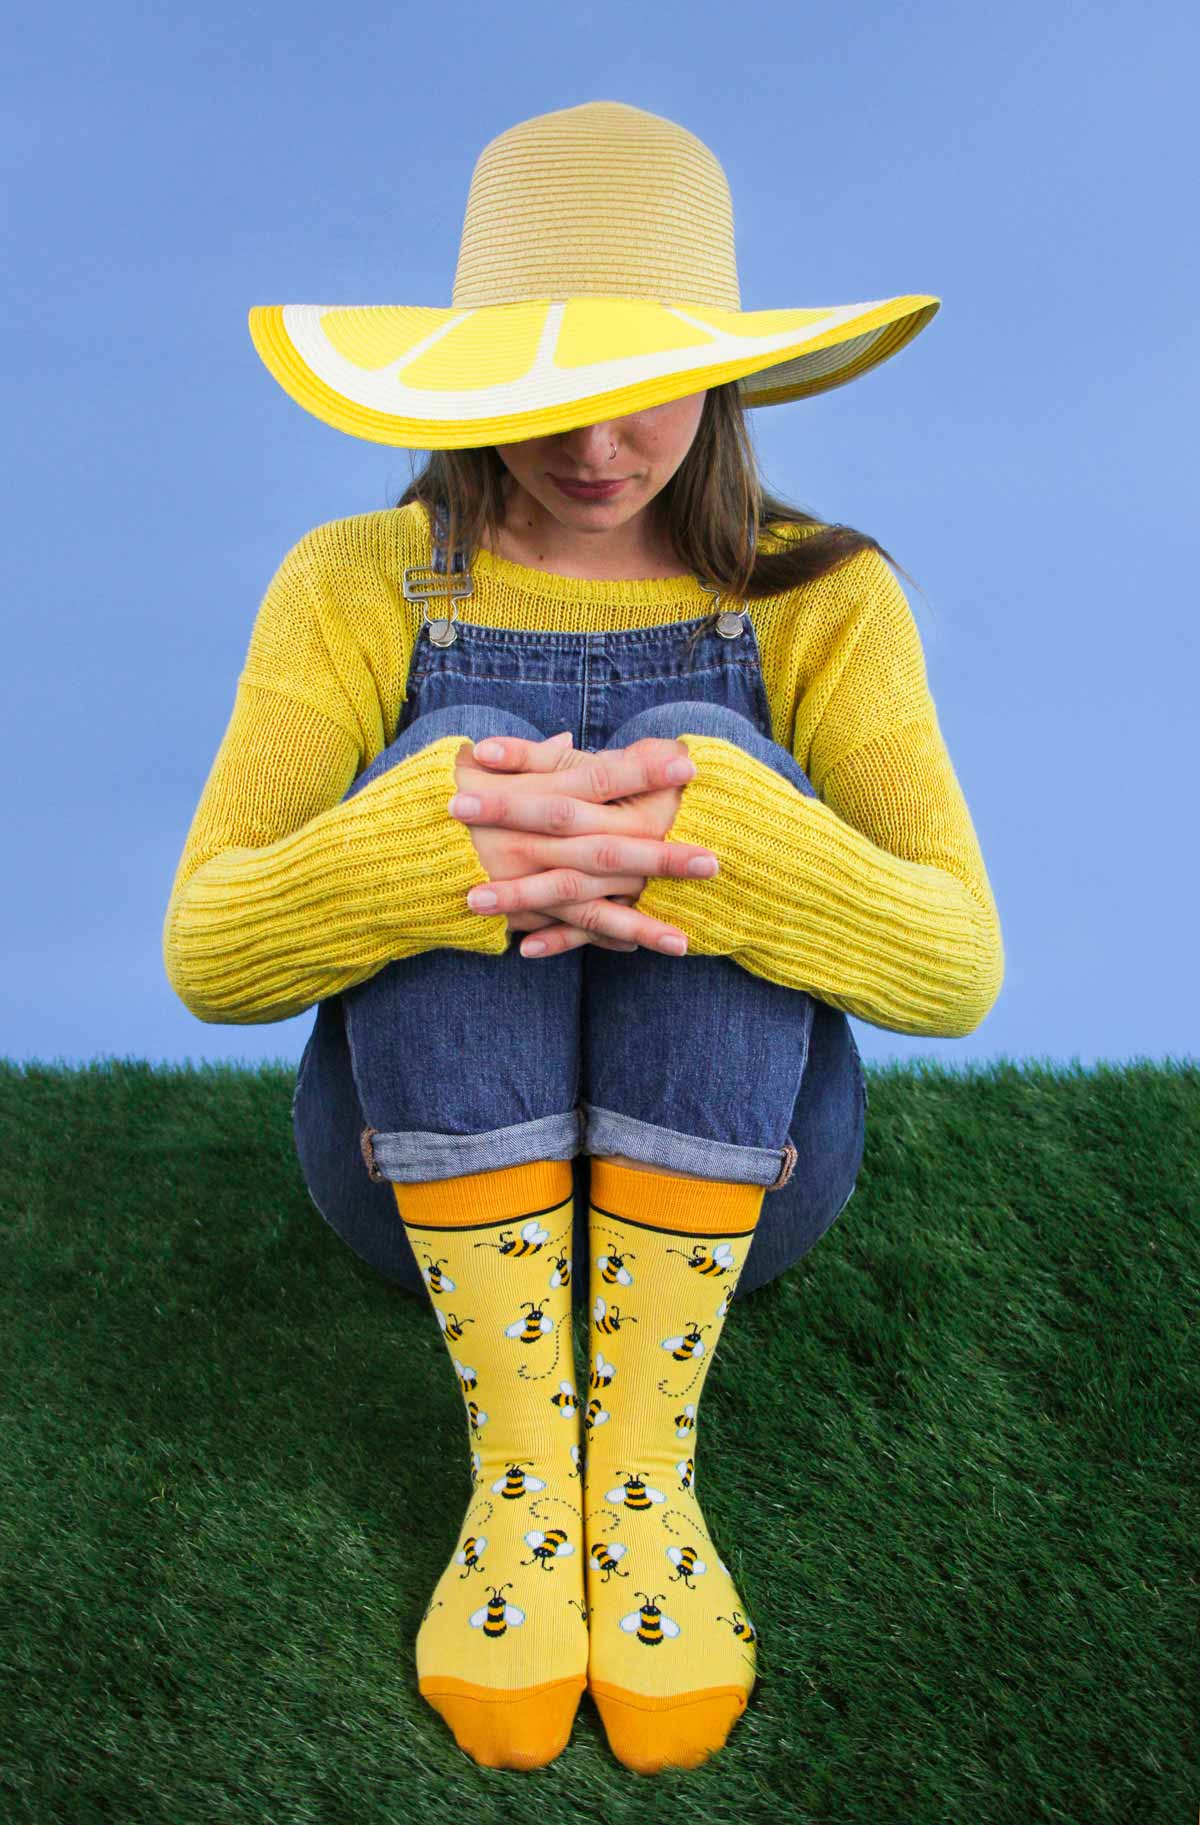 Woman in blue overalls wearing a yellow sweater, yellow sunhat, and bright yellow socks with bumblebee designs on them sitting on grass and a bright blue background.